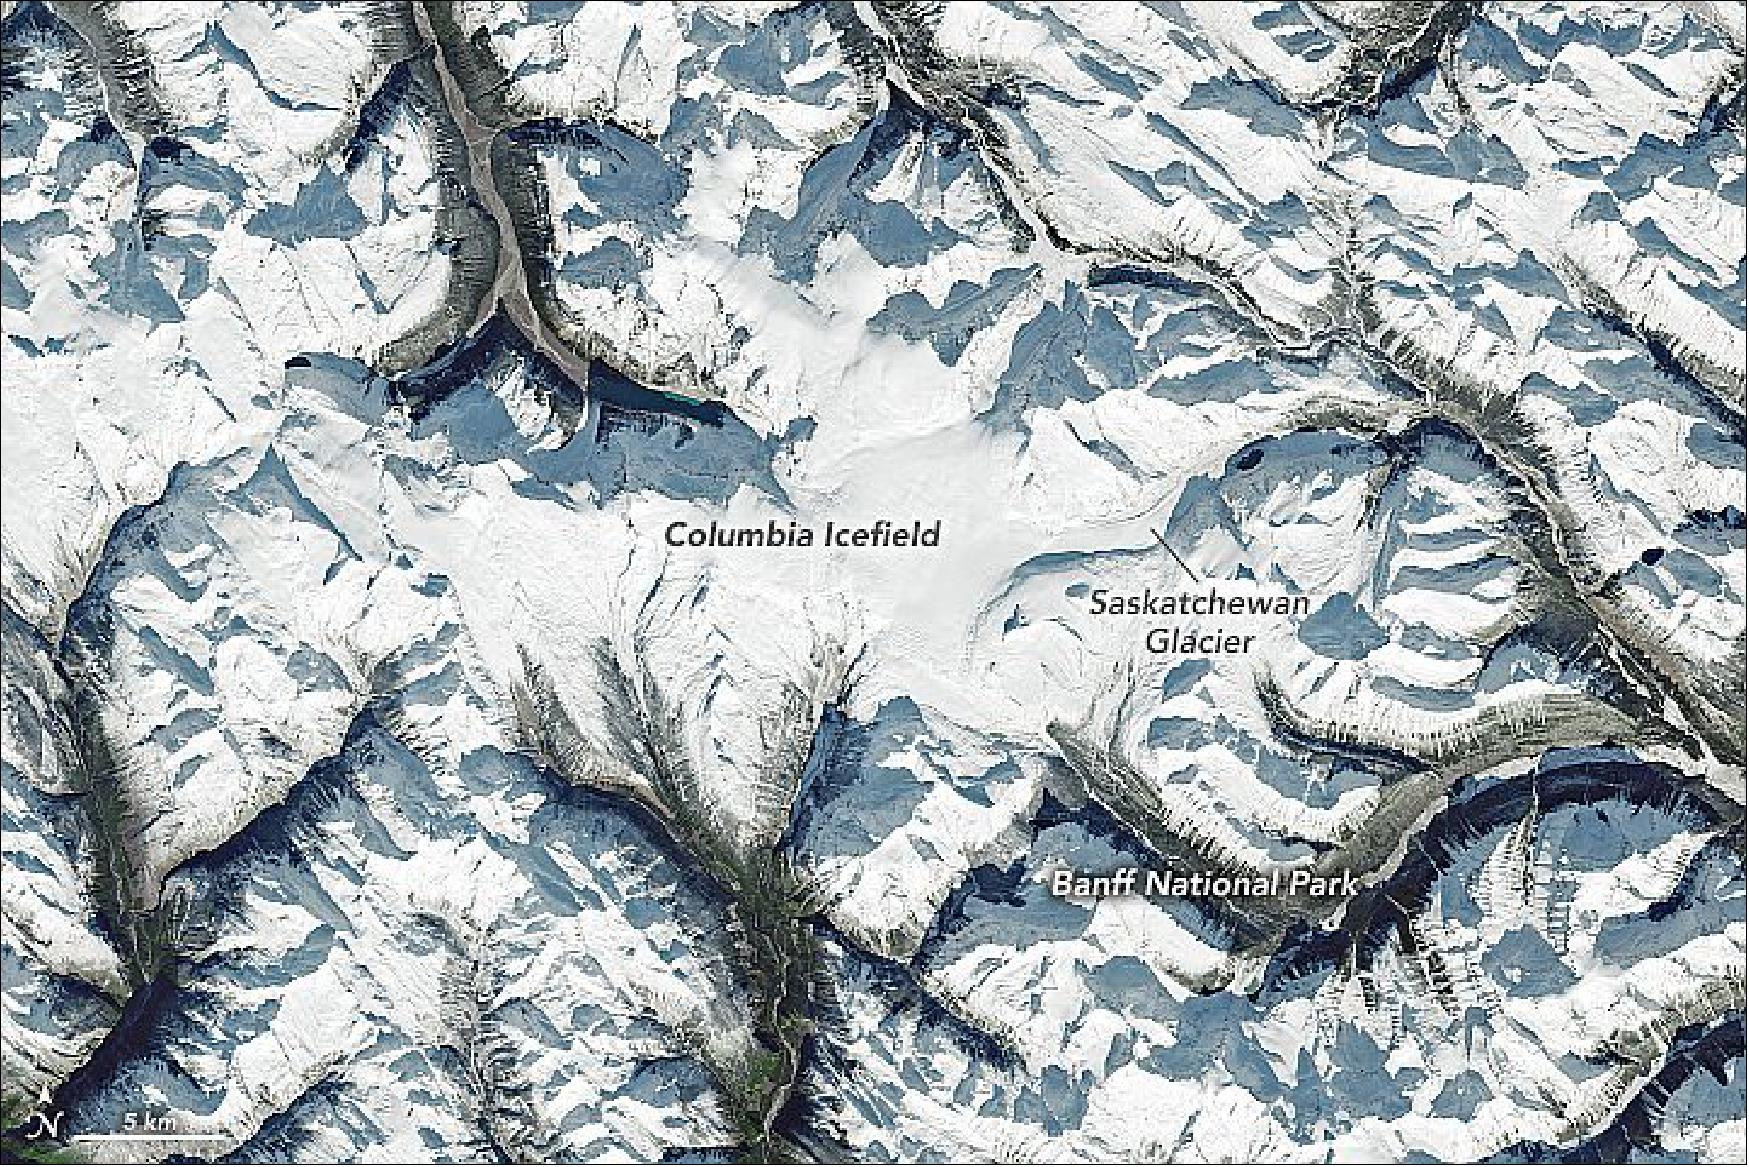 Figure 26: The icefield is visible in this image, acquired on October 31, 2021, by the Operational Land Imager (OLI) on Landsat 8. The icefield spans the provinces of British Columbia and Alberta, as well as Jasper and Banff National Parks. Saskatchewan Glacier, the icefield’s largest outlet glacier, forms the headwaters of the North Saskatchewan River—an important source of freshwater for communities downstream. Clear skies between storm systems gave satellites a cloud-free view from the Coast Mountains in British Columbia to the Rockies in western Alberta (image credit: NASA Earth Observatory using Landsat data from the U.S. Geological Survey )